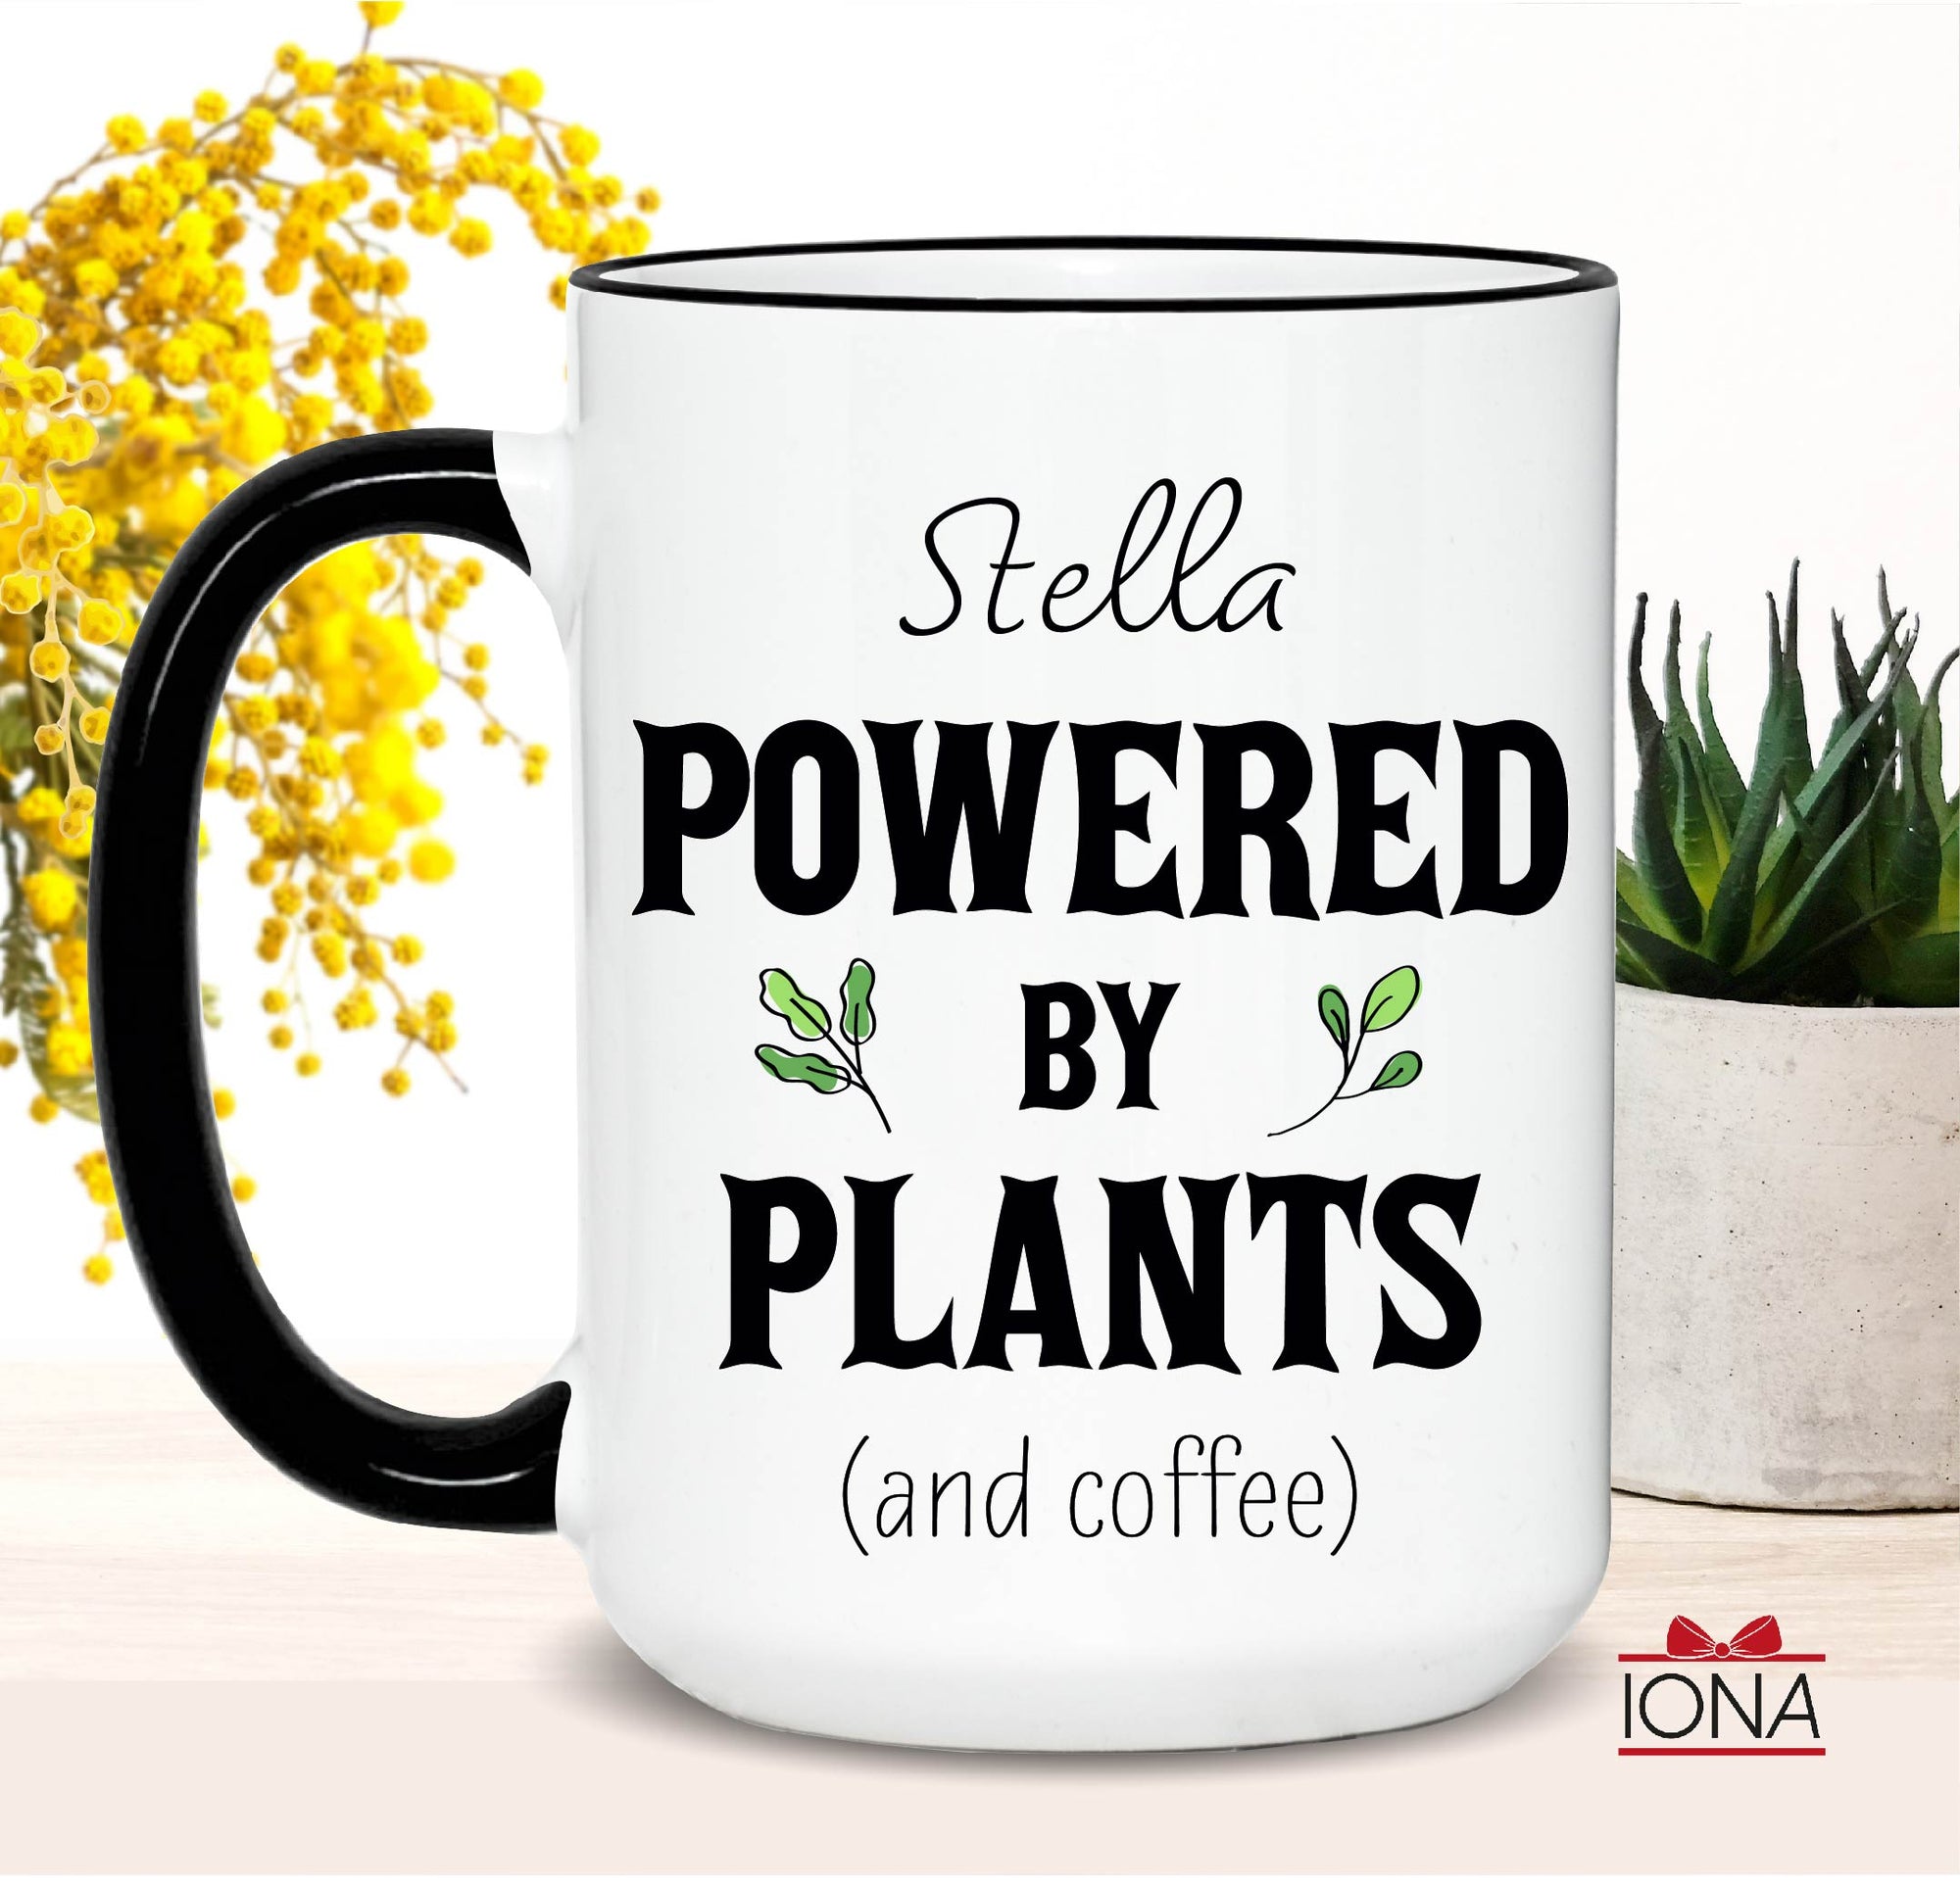 Personalized Powered by Plants and Coffee Mug – Custom Funny Vegetarian Gift for Women Men – Vegan Tea Cup with Name